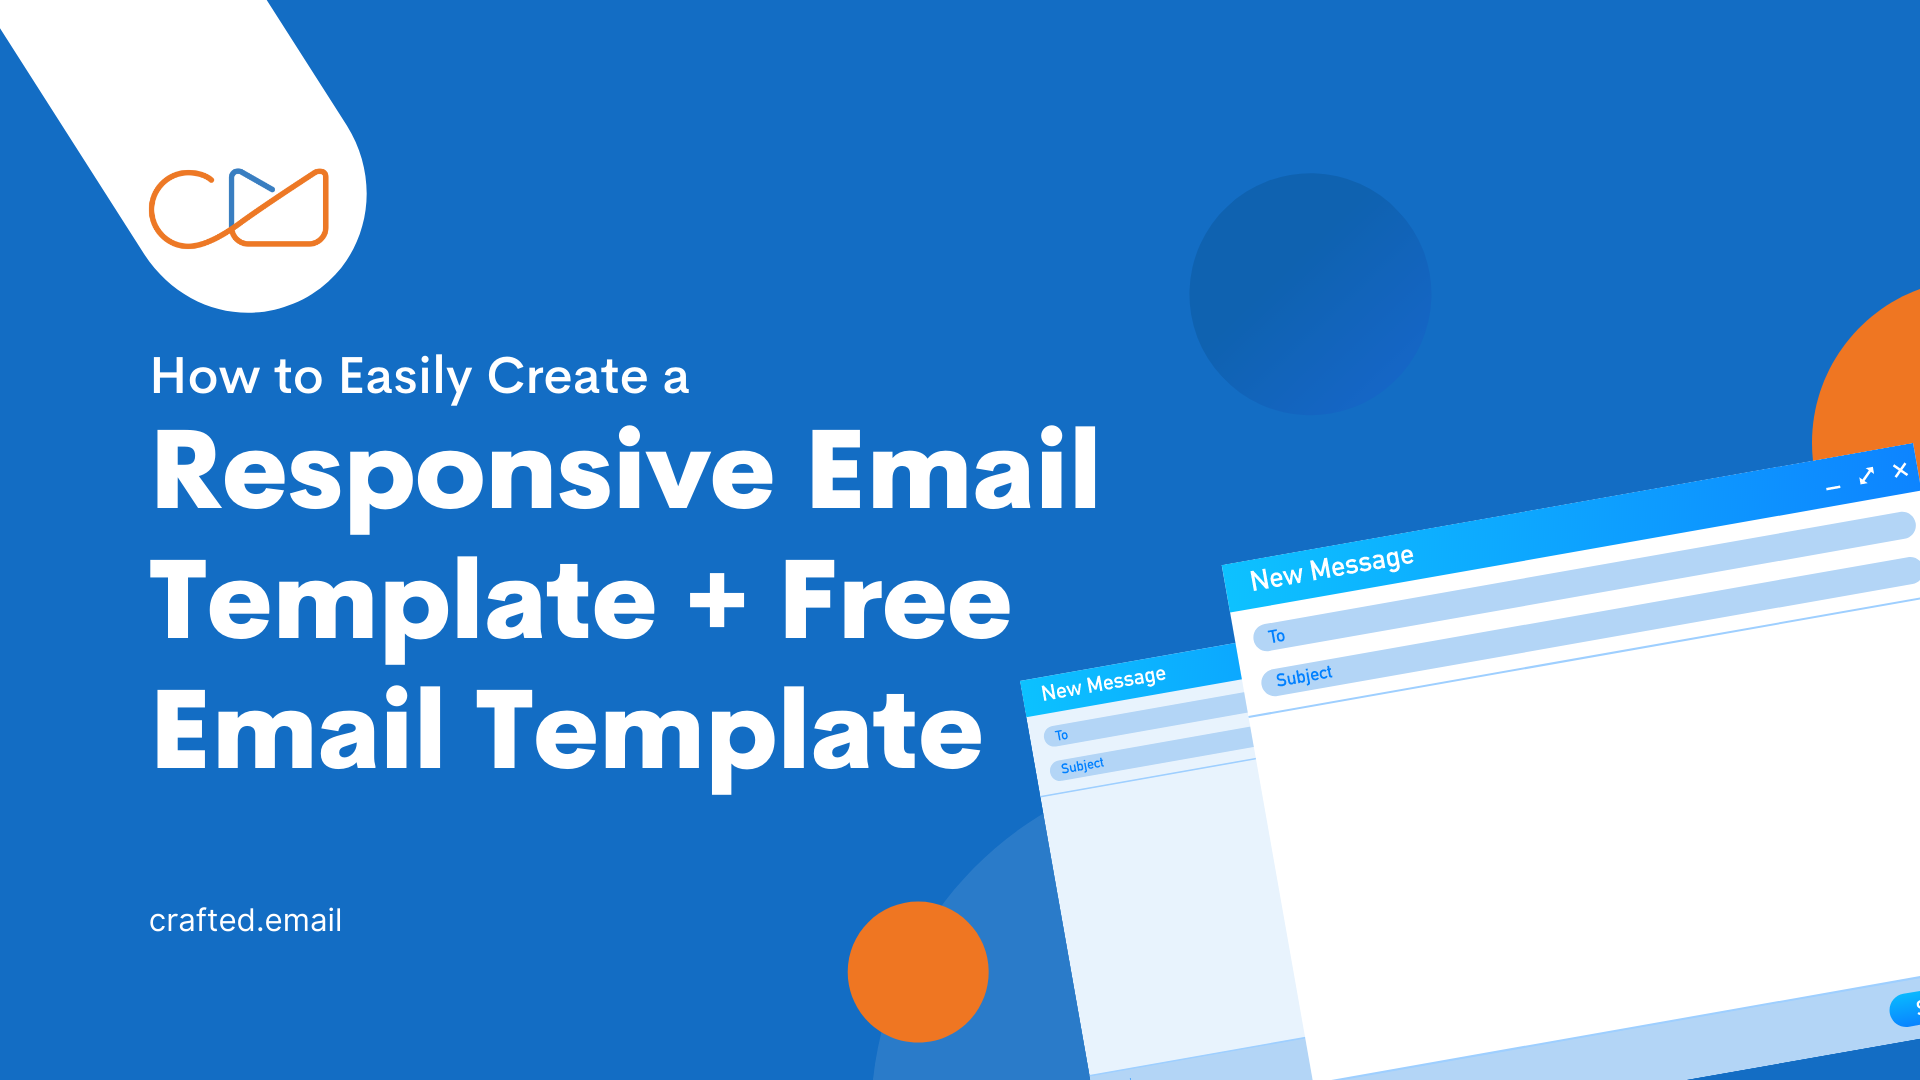 How to Easily Create a Responsive Email Template + Free Email Template